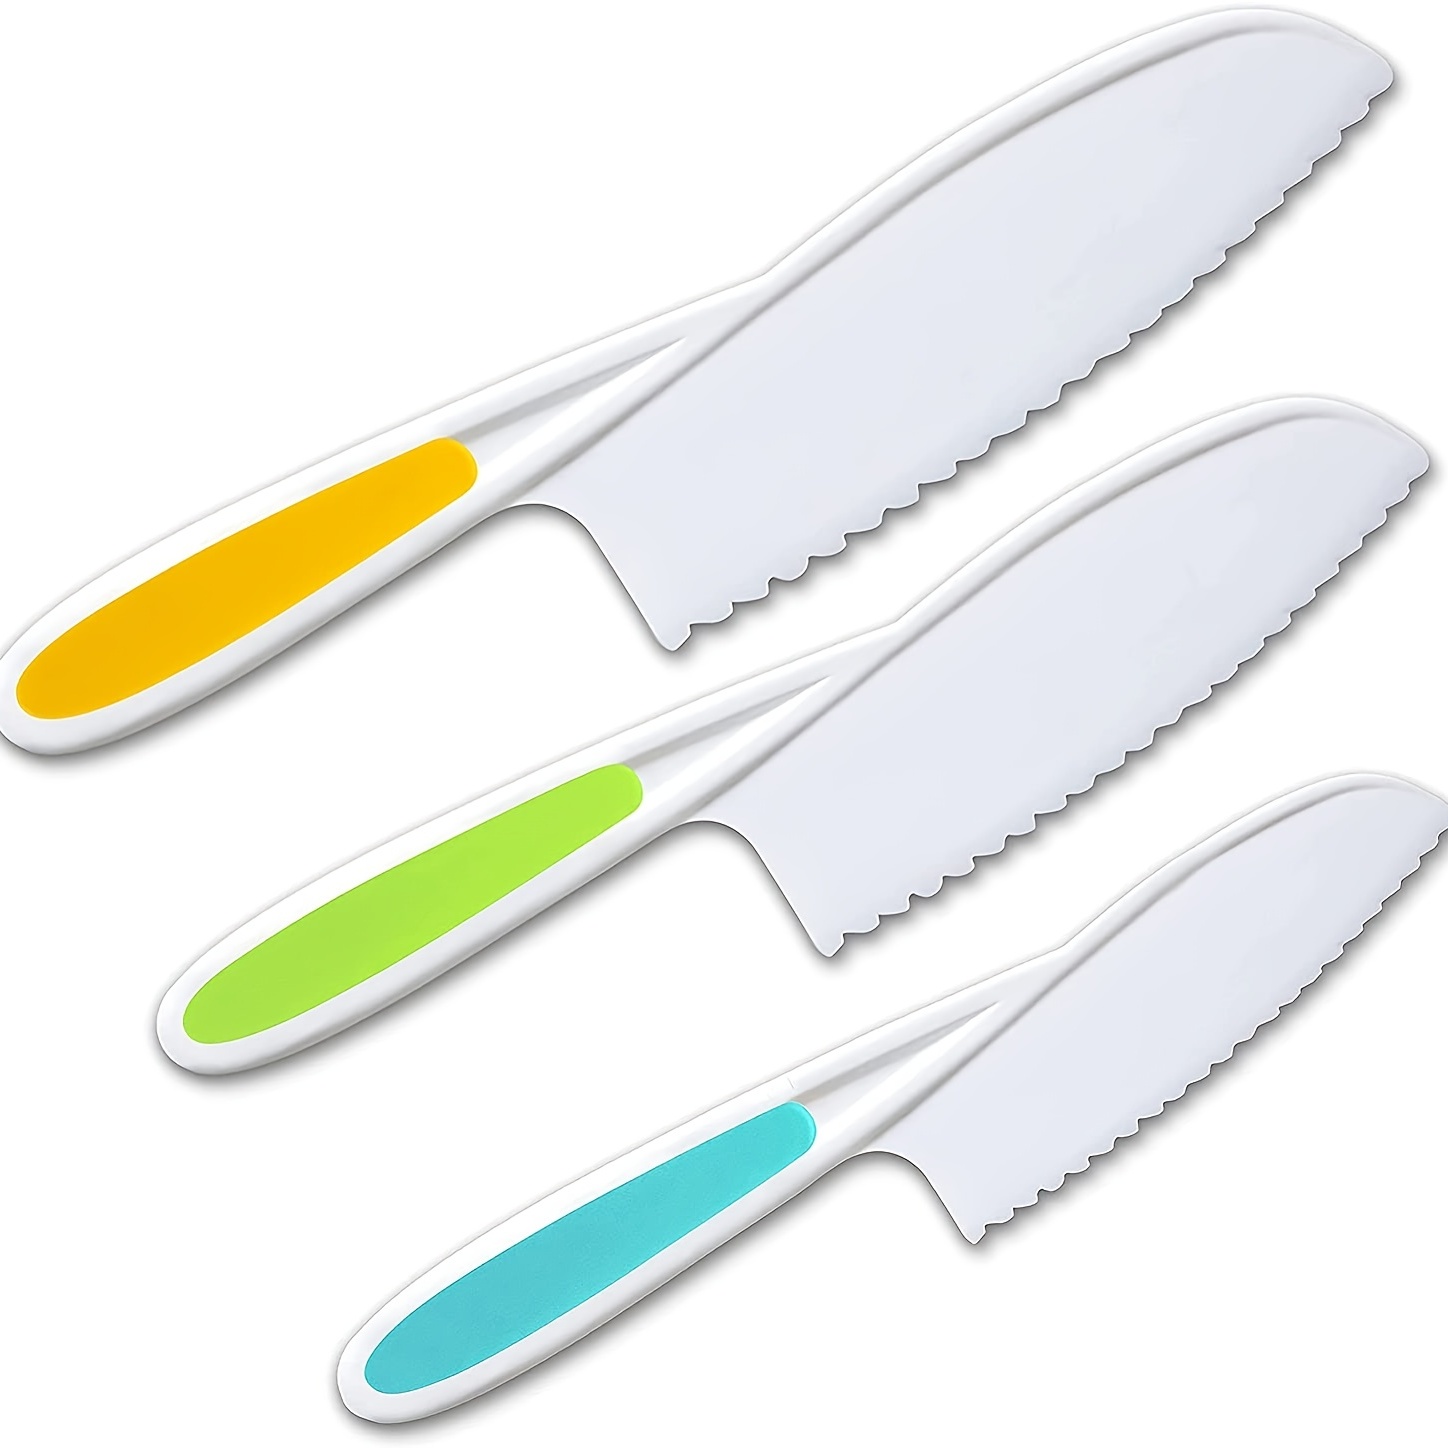 7-Piece Kids Knives for Real Cooking Set, Christmas Gifts for 2 3 4 5 6  Year Old Boys Girls, Fake Knife Safe Kids Knives. Nylon Knives for Fruit